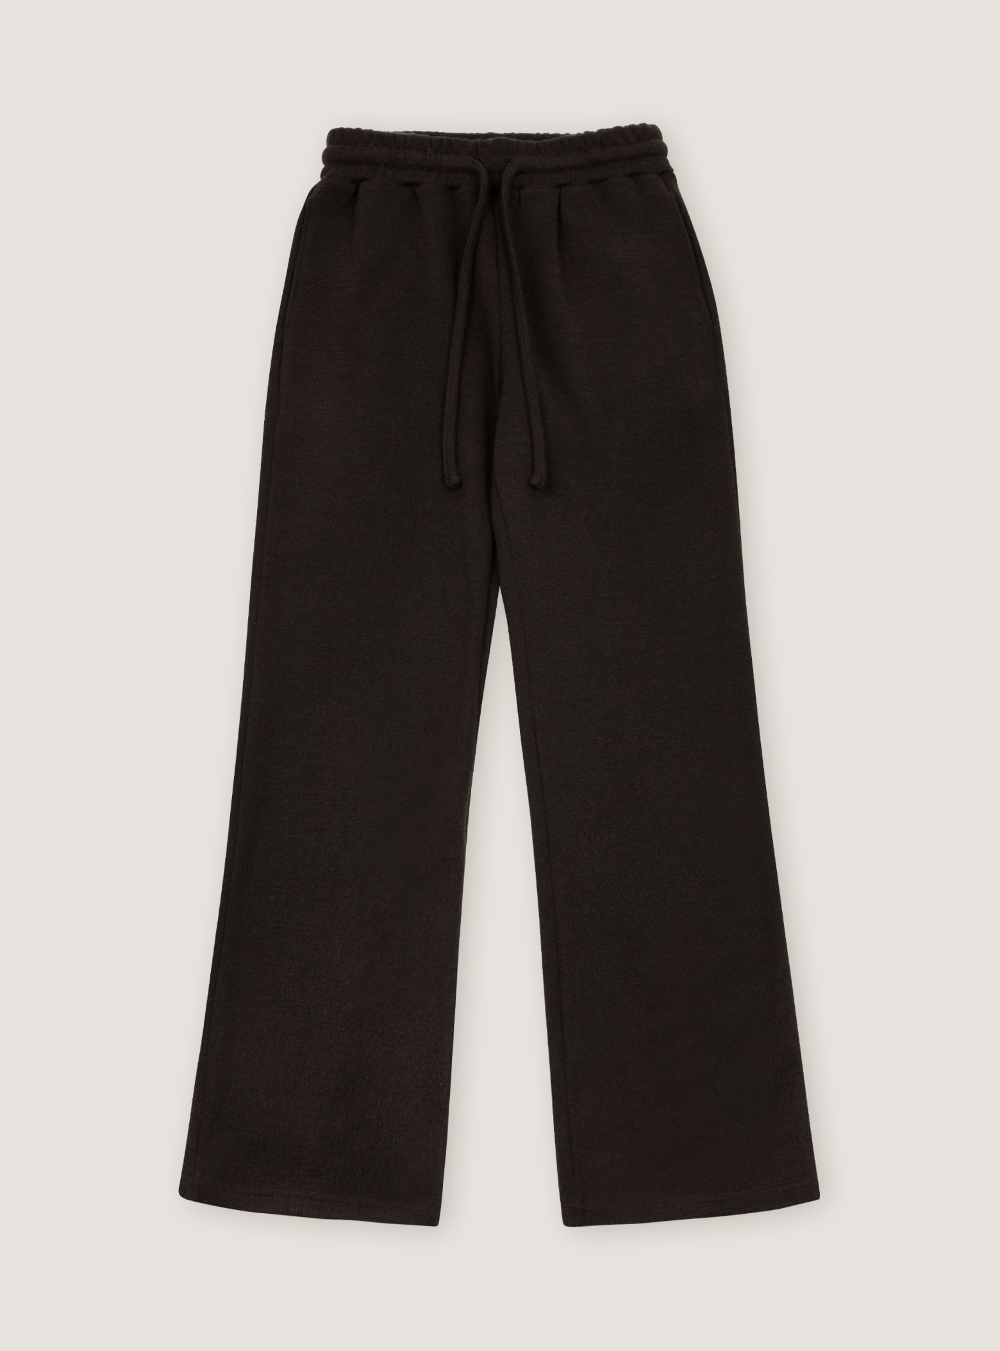 RELAXED PANTS - BROWN